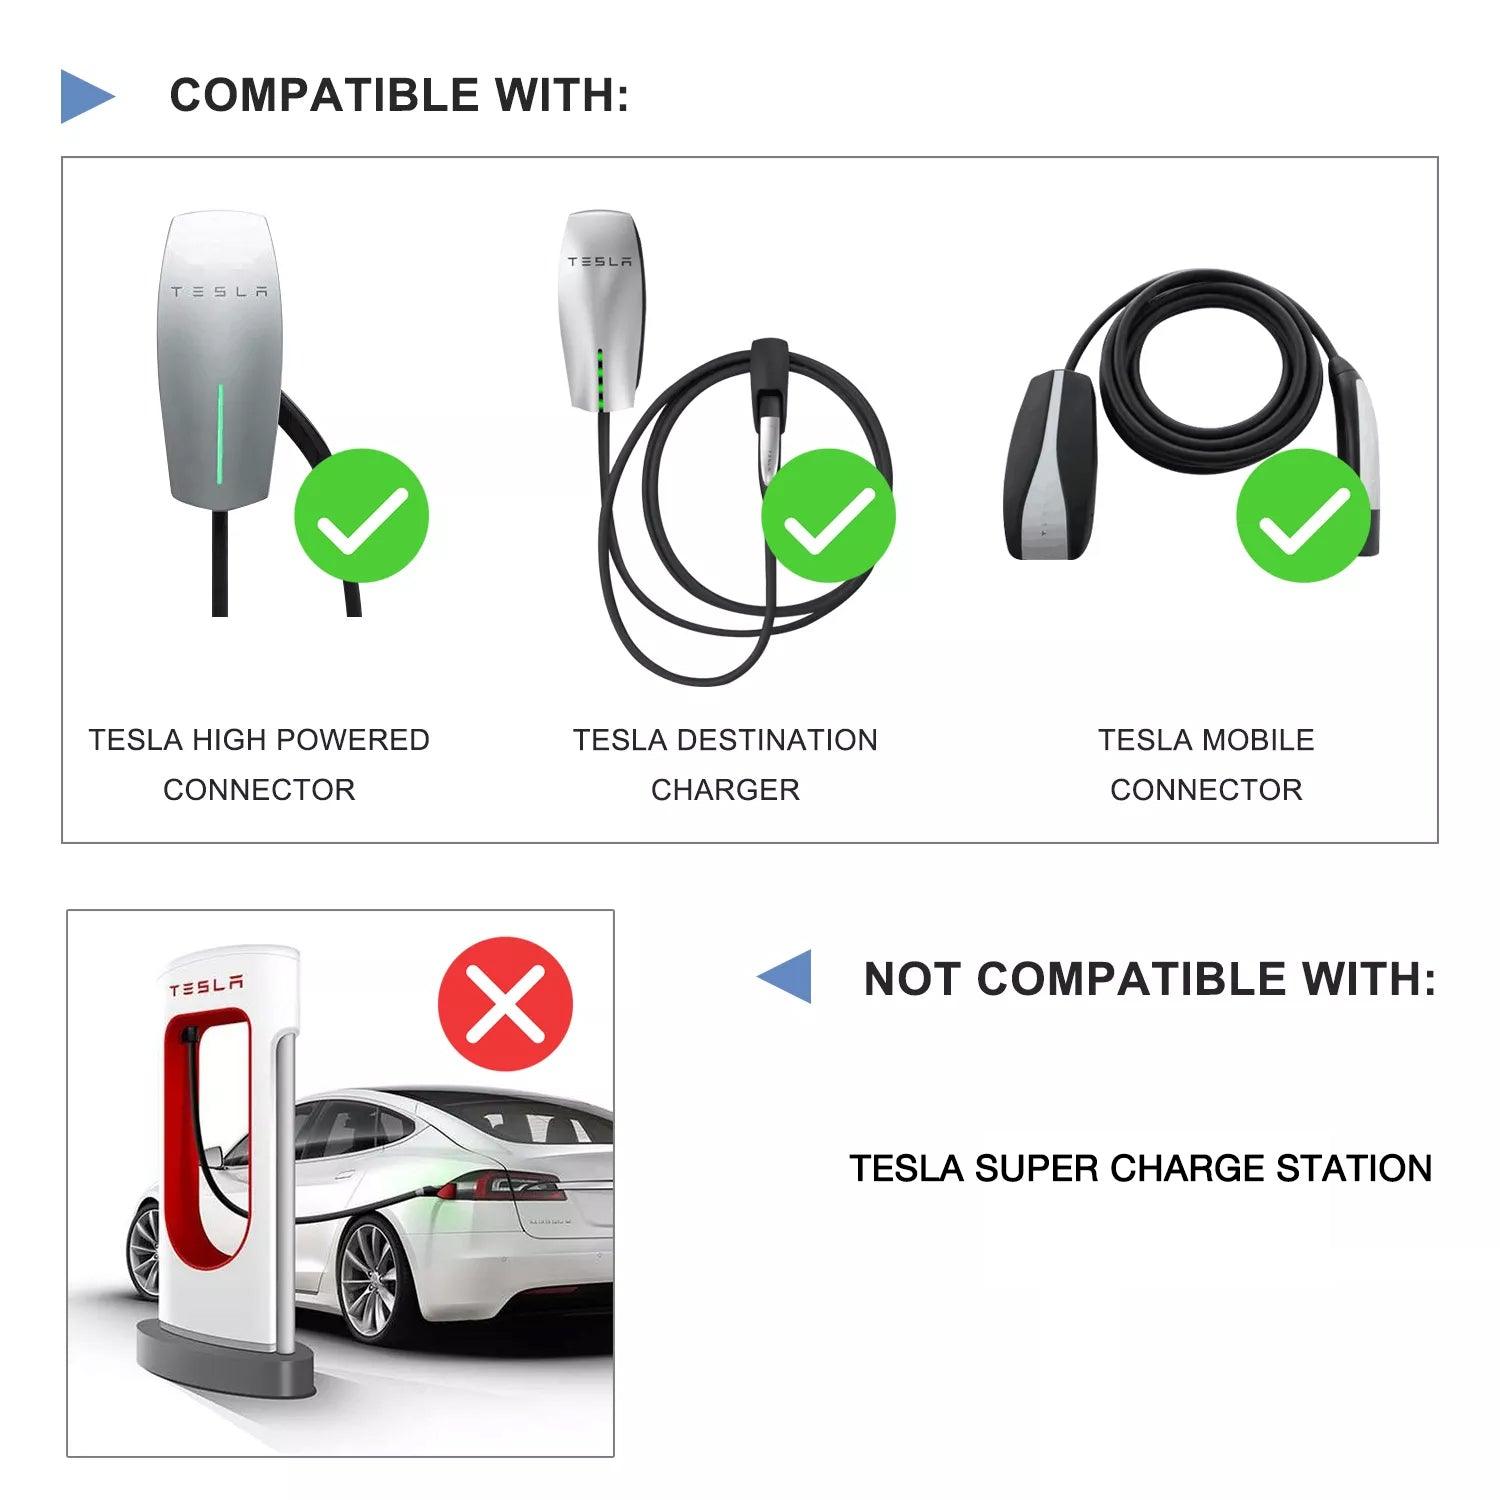 Tesla to J1772 Adapter Charger For All Model S/X/3/Y, 40Amp / 250V AC Max, For Level 1 - Level 2 Charging, IP44 Weatherproof